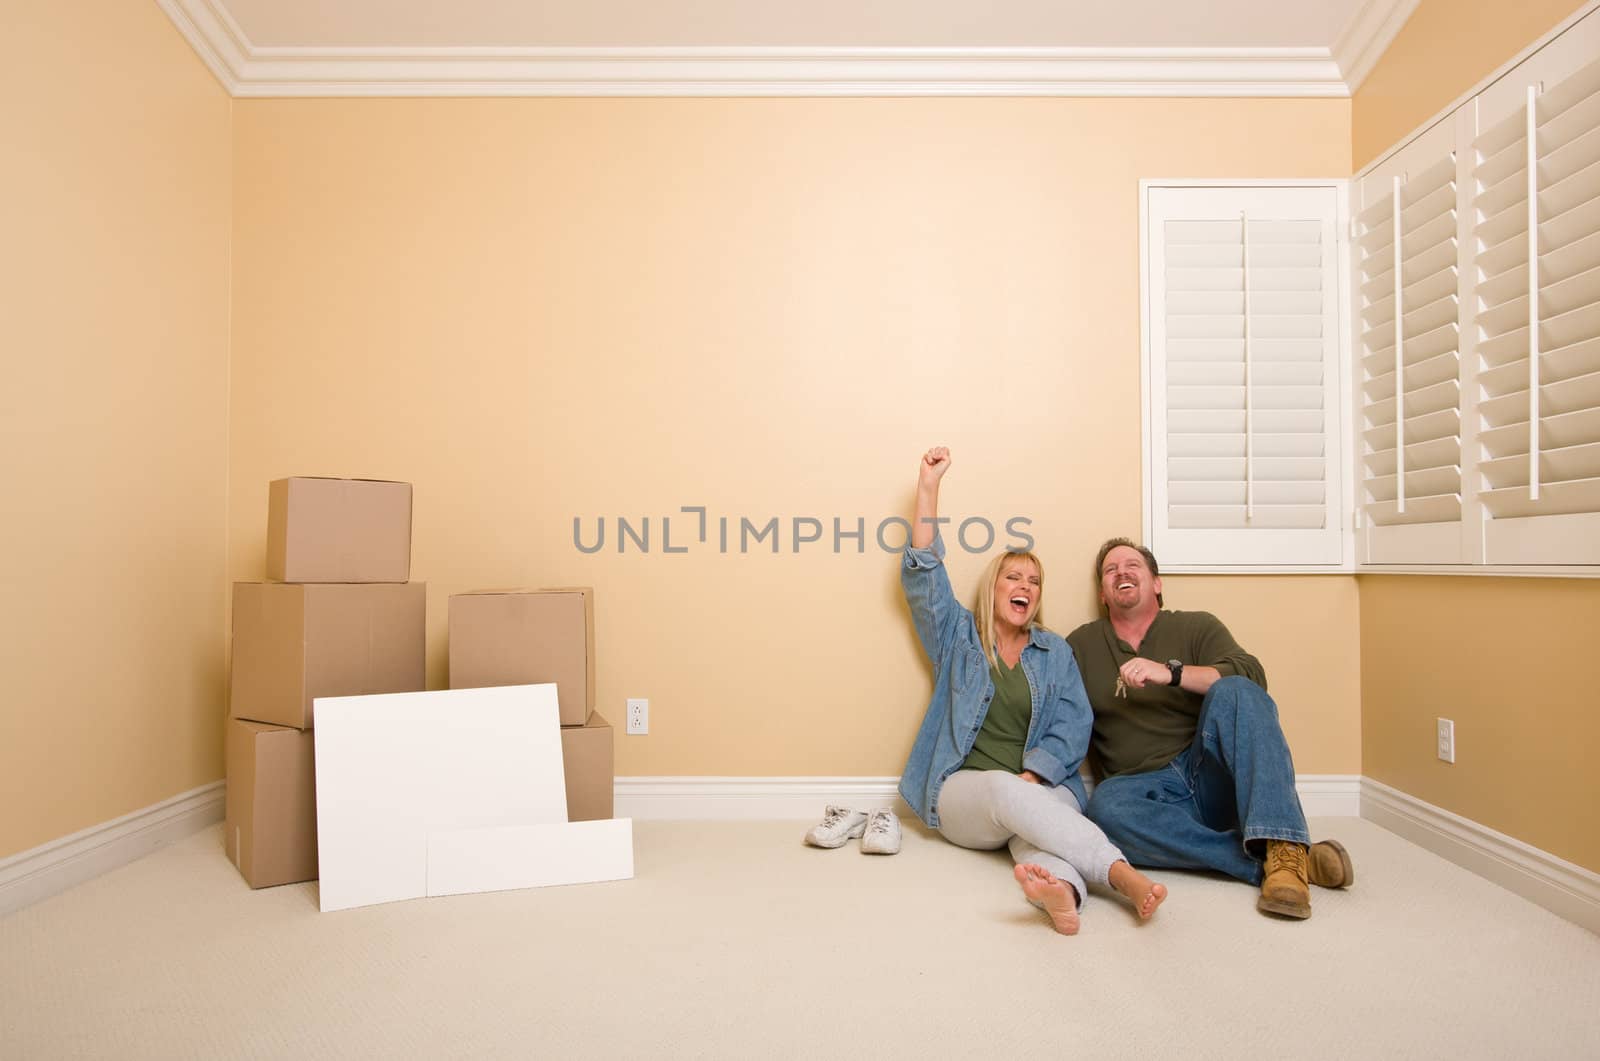 Couple on Floor Near Boxes and Blank Signs by Feverpitched